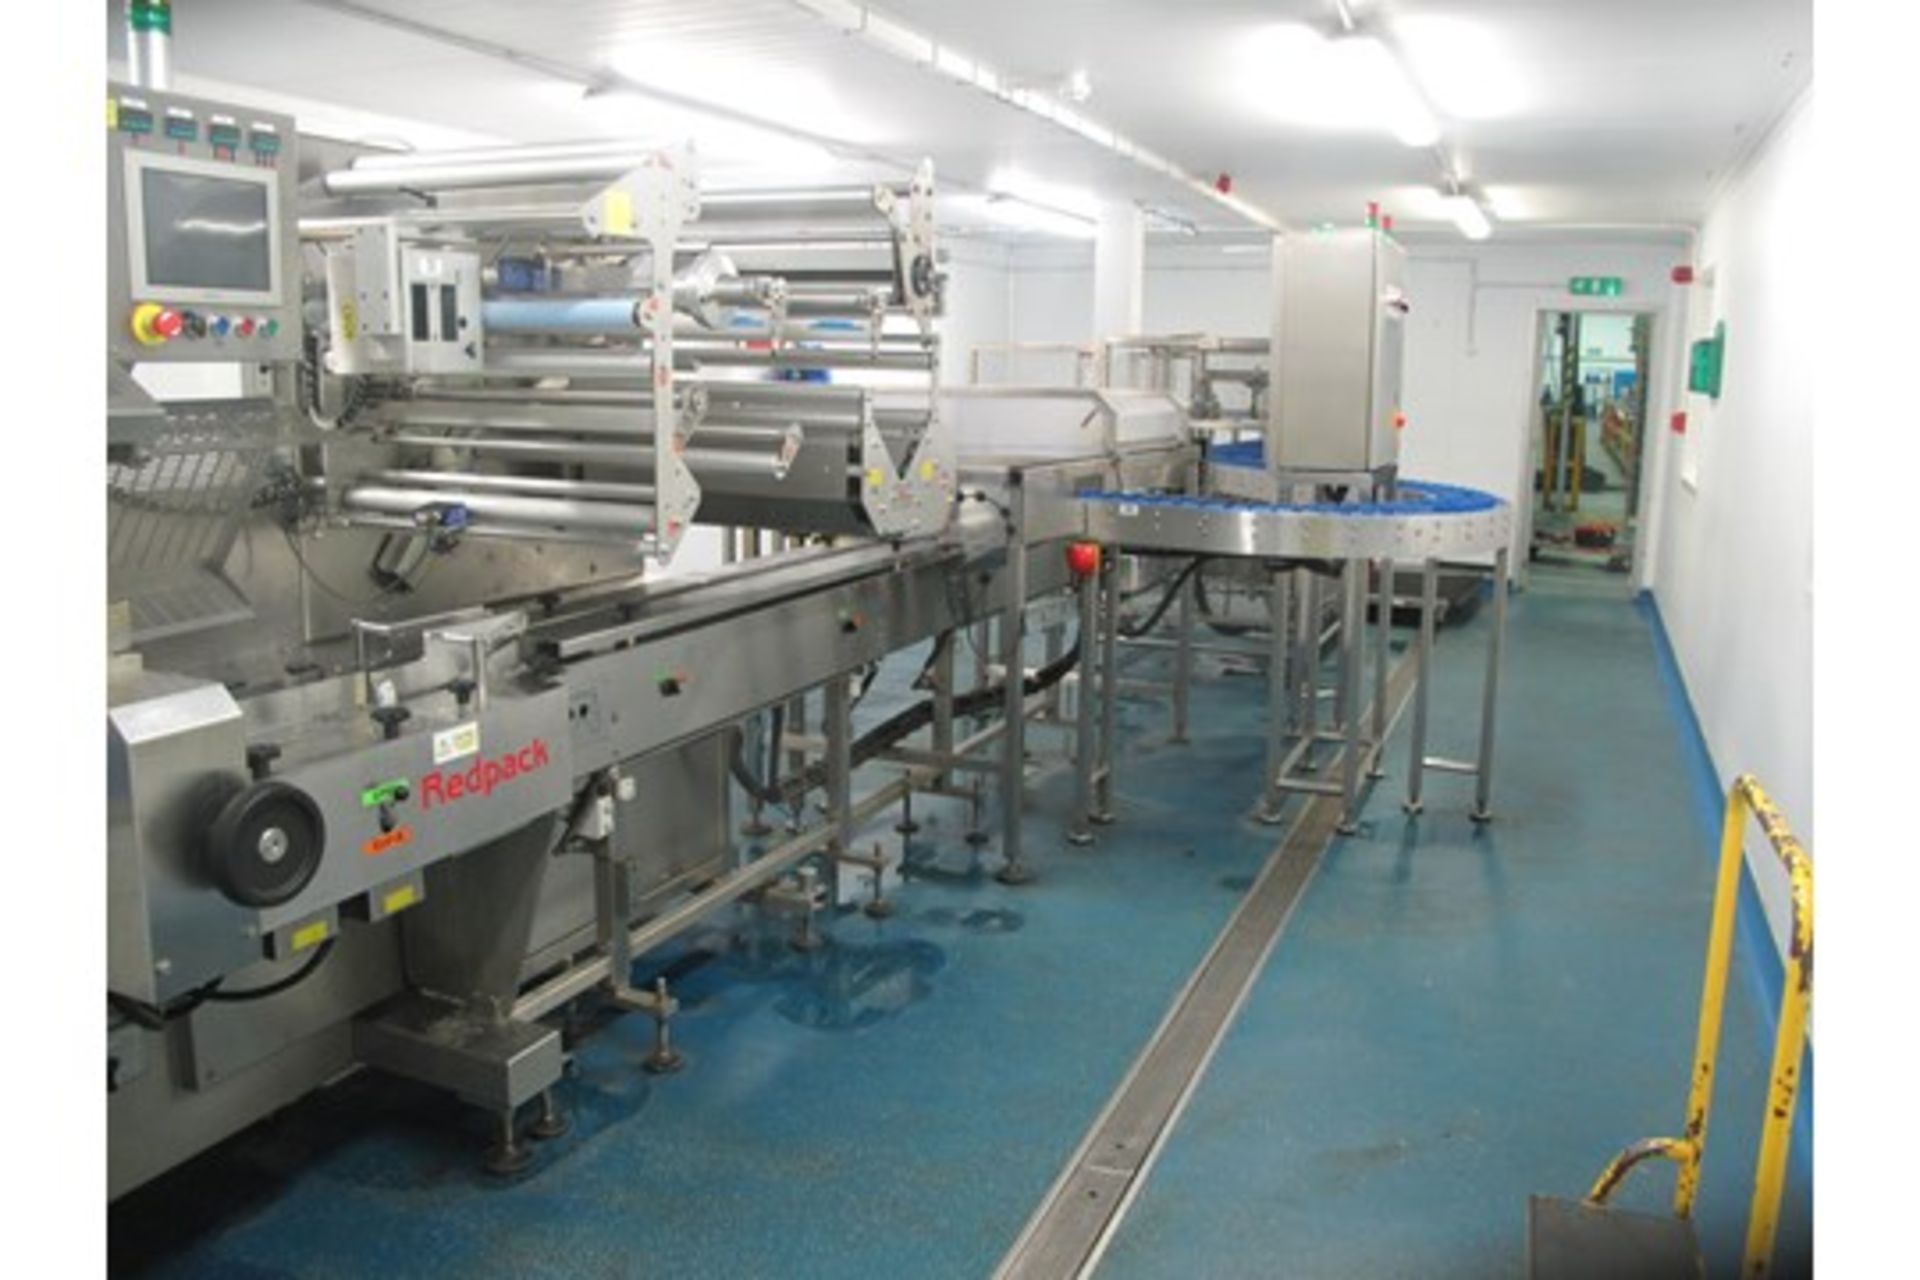 Complete cucumber cutting and packing line consists of: Redpack Flow-wrapper P325SP, twin spooling